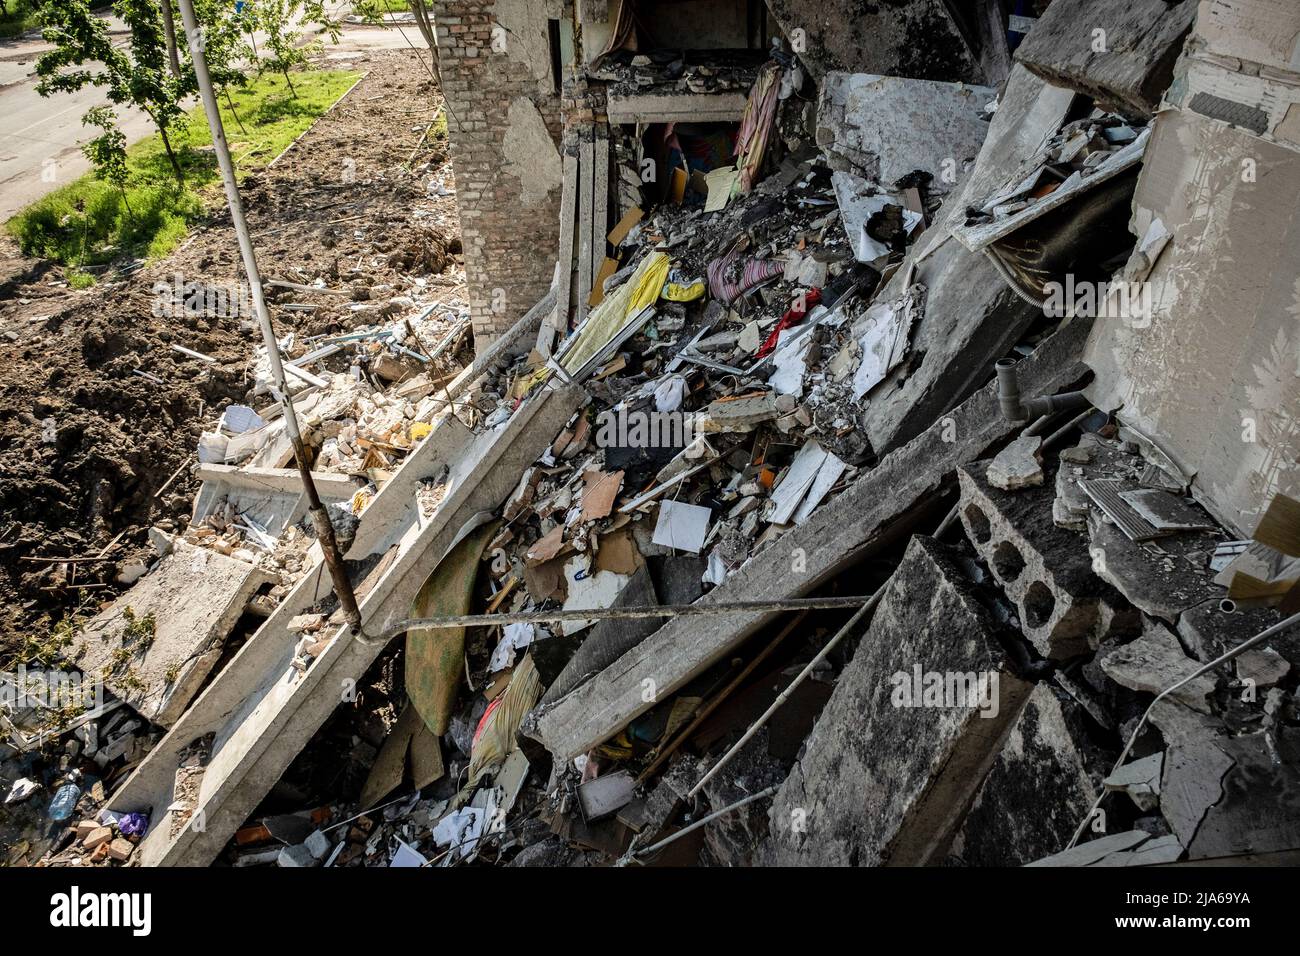 Bakhmut, Ukraine. 24th May, 2022. Ruins and debris of a residential building in Bakhmut, Donbas. As Bakhmut stands as a key city to Ukrainian forces in defending Donetsk(Donbas) region, the city is under attack by the Russian troops. The Russian invasion of Ukraine started on February 24, the war that has killed numerous civilians and soldiers. Credit: SOPA Images Limited/Alamy Live News Stock Photo